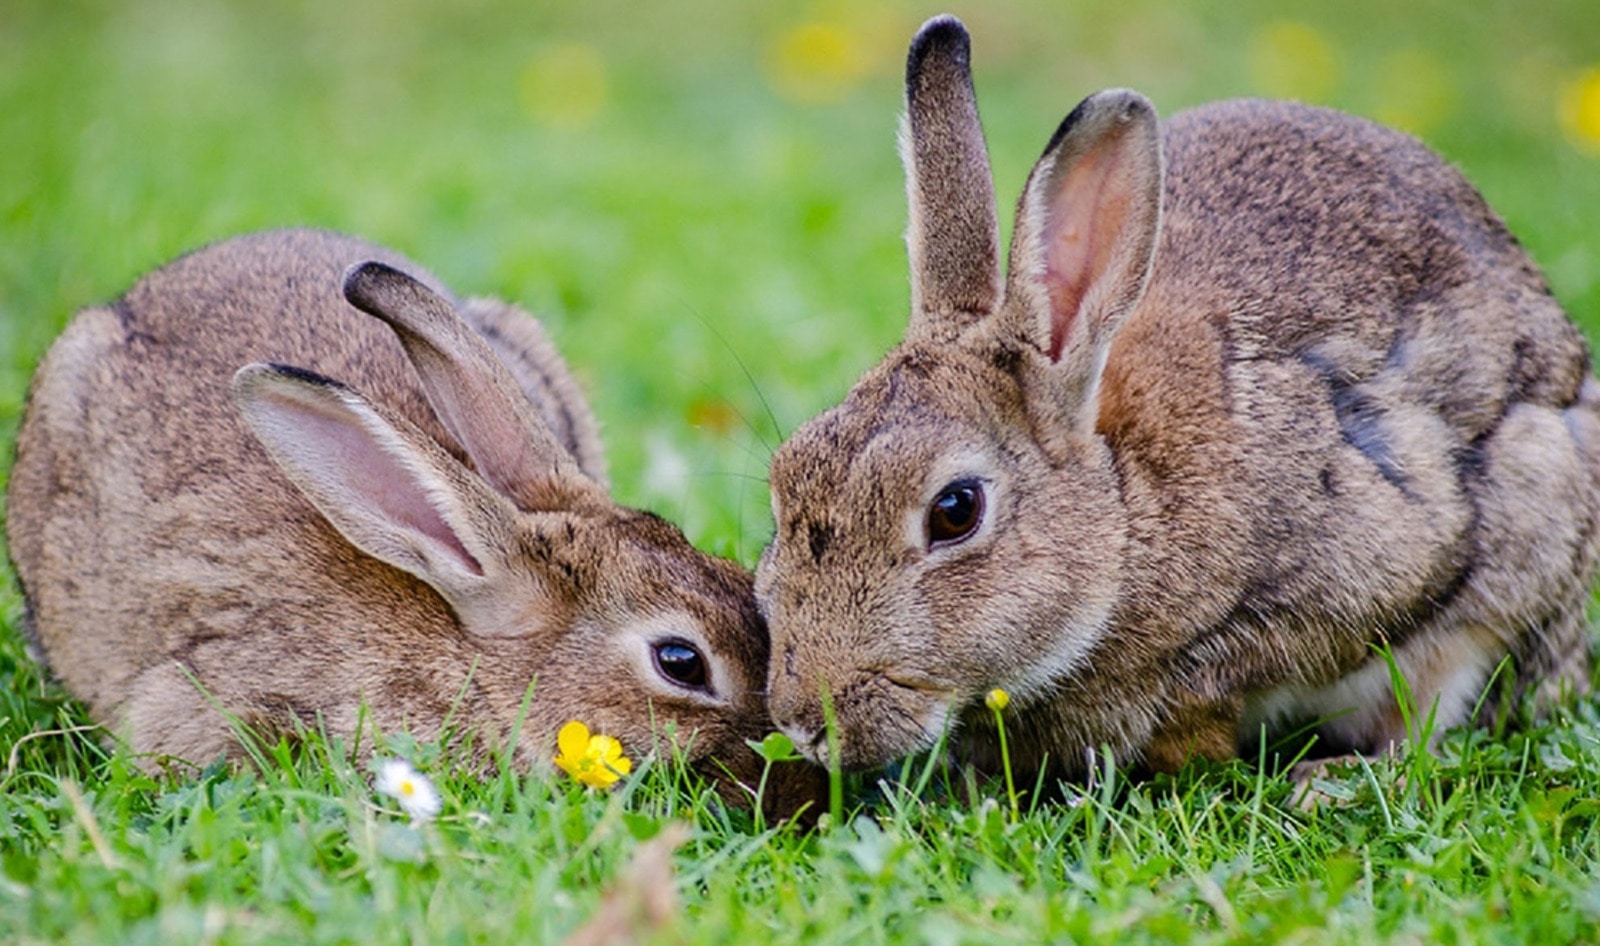 Cruelty-Free Cosmetics Act to Be Signed into Law in California